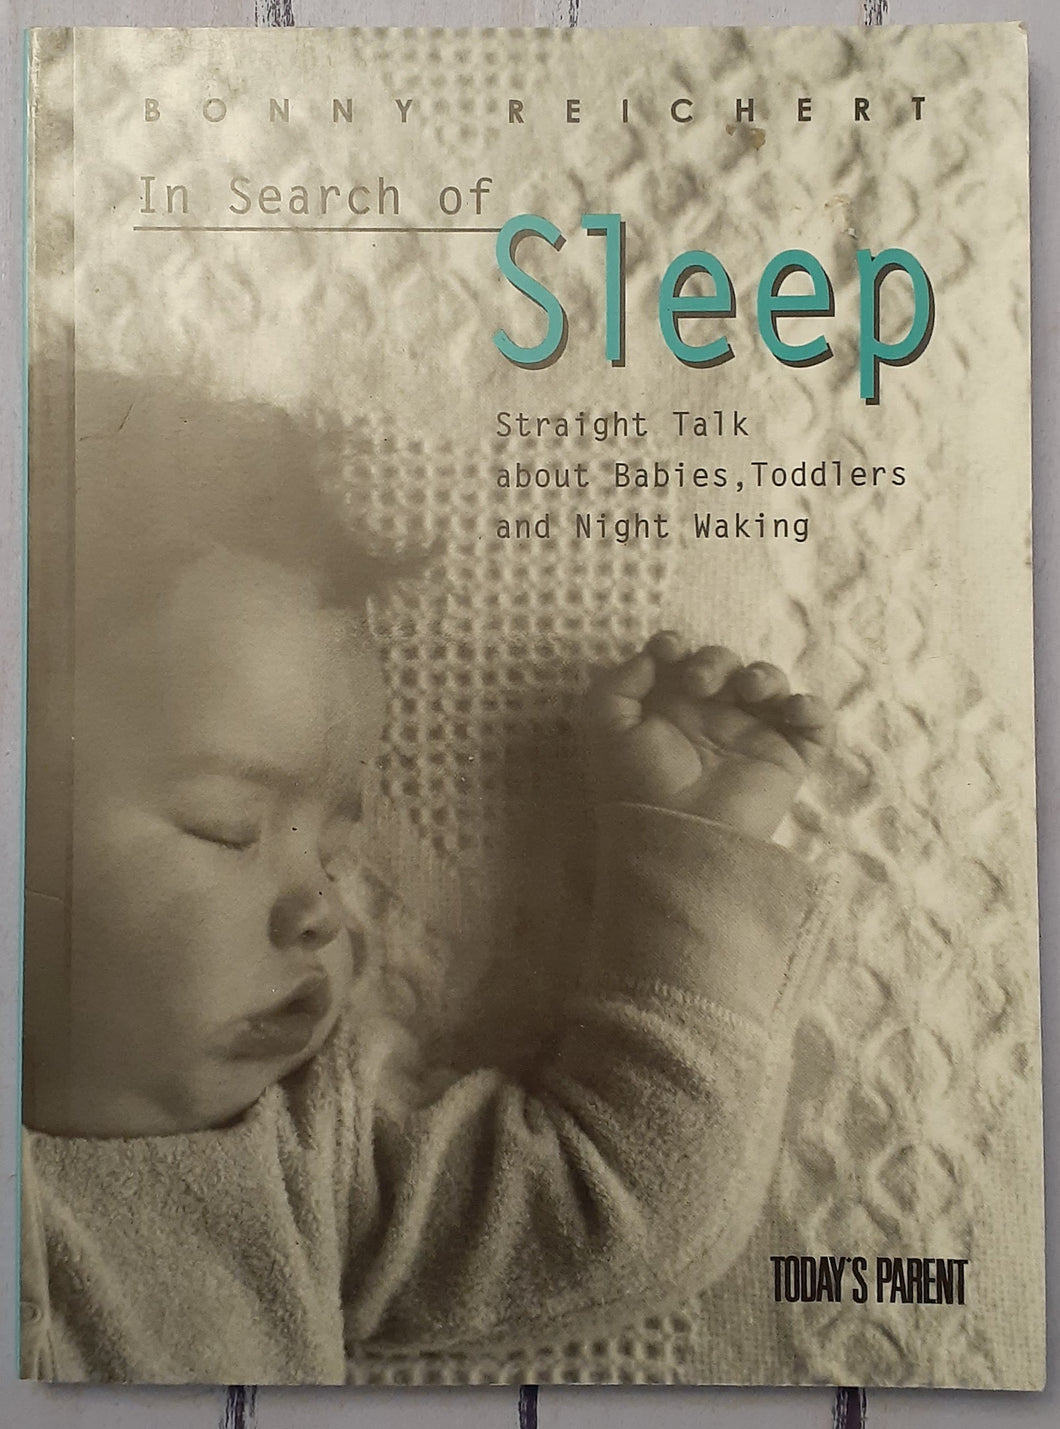 In Search of Sleep: Straight Talk about Babies, Toddlers and Night Waking